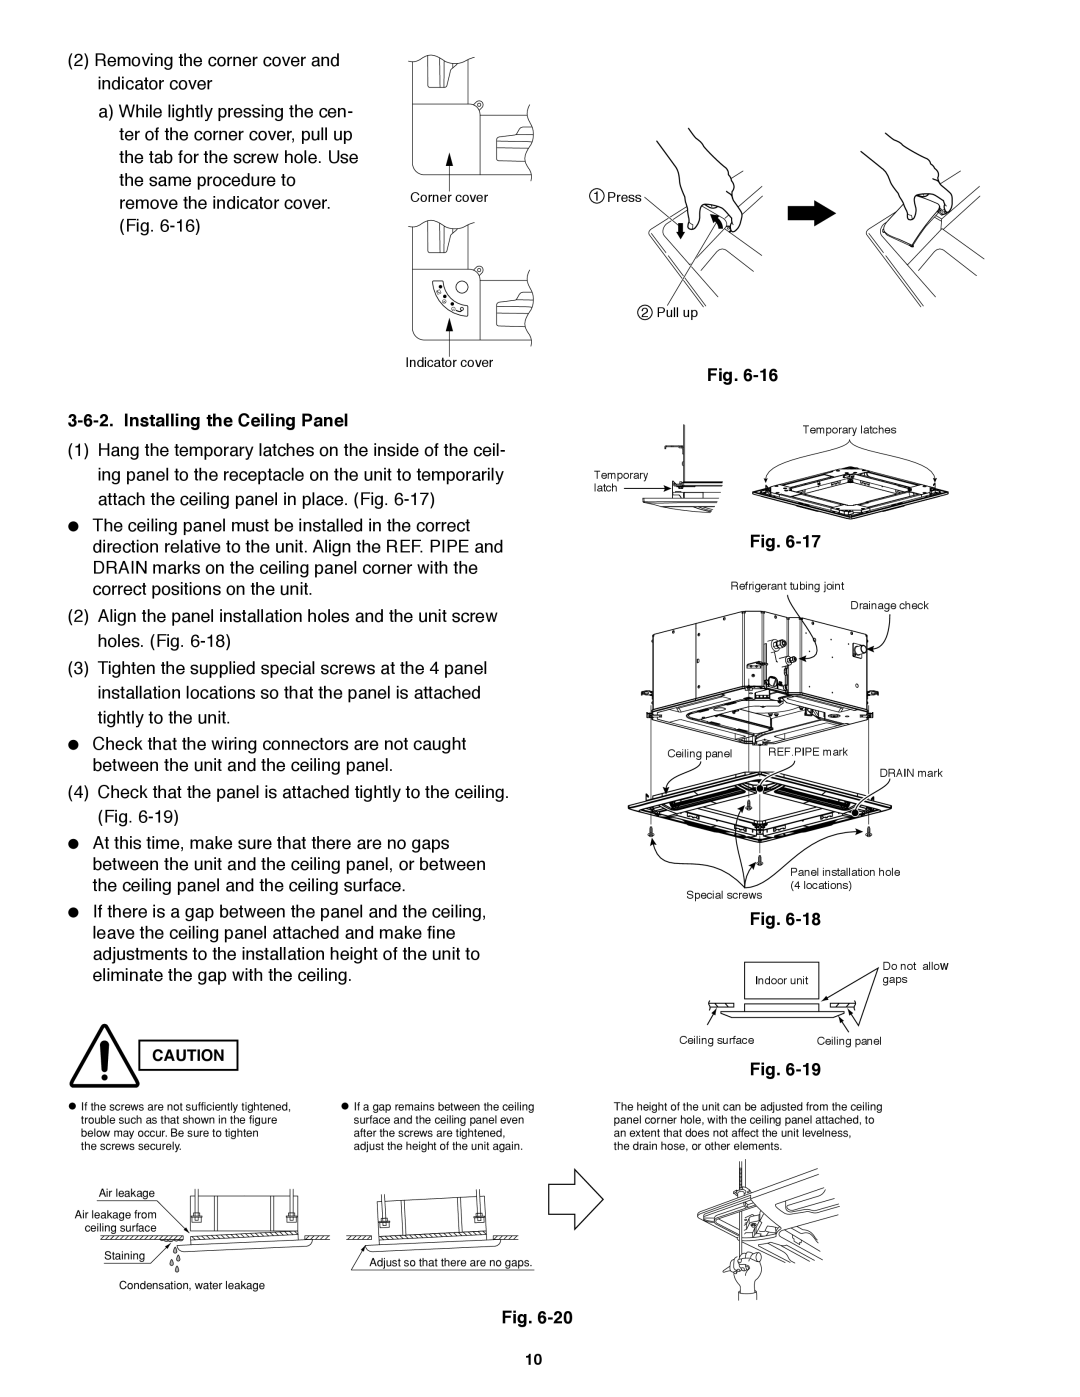 Panasonic R410A service manual Fig, Installing the Ceiling Panel 